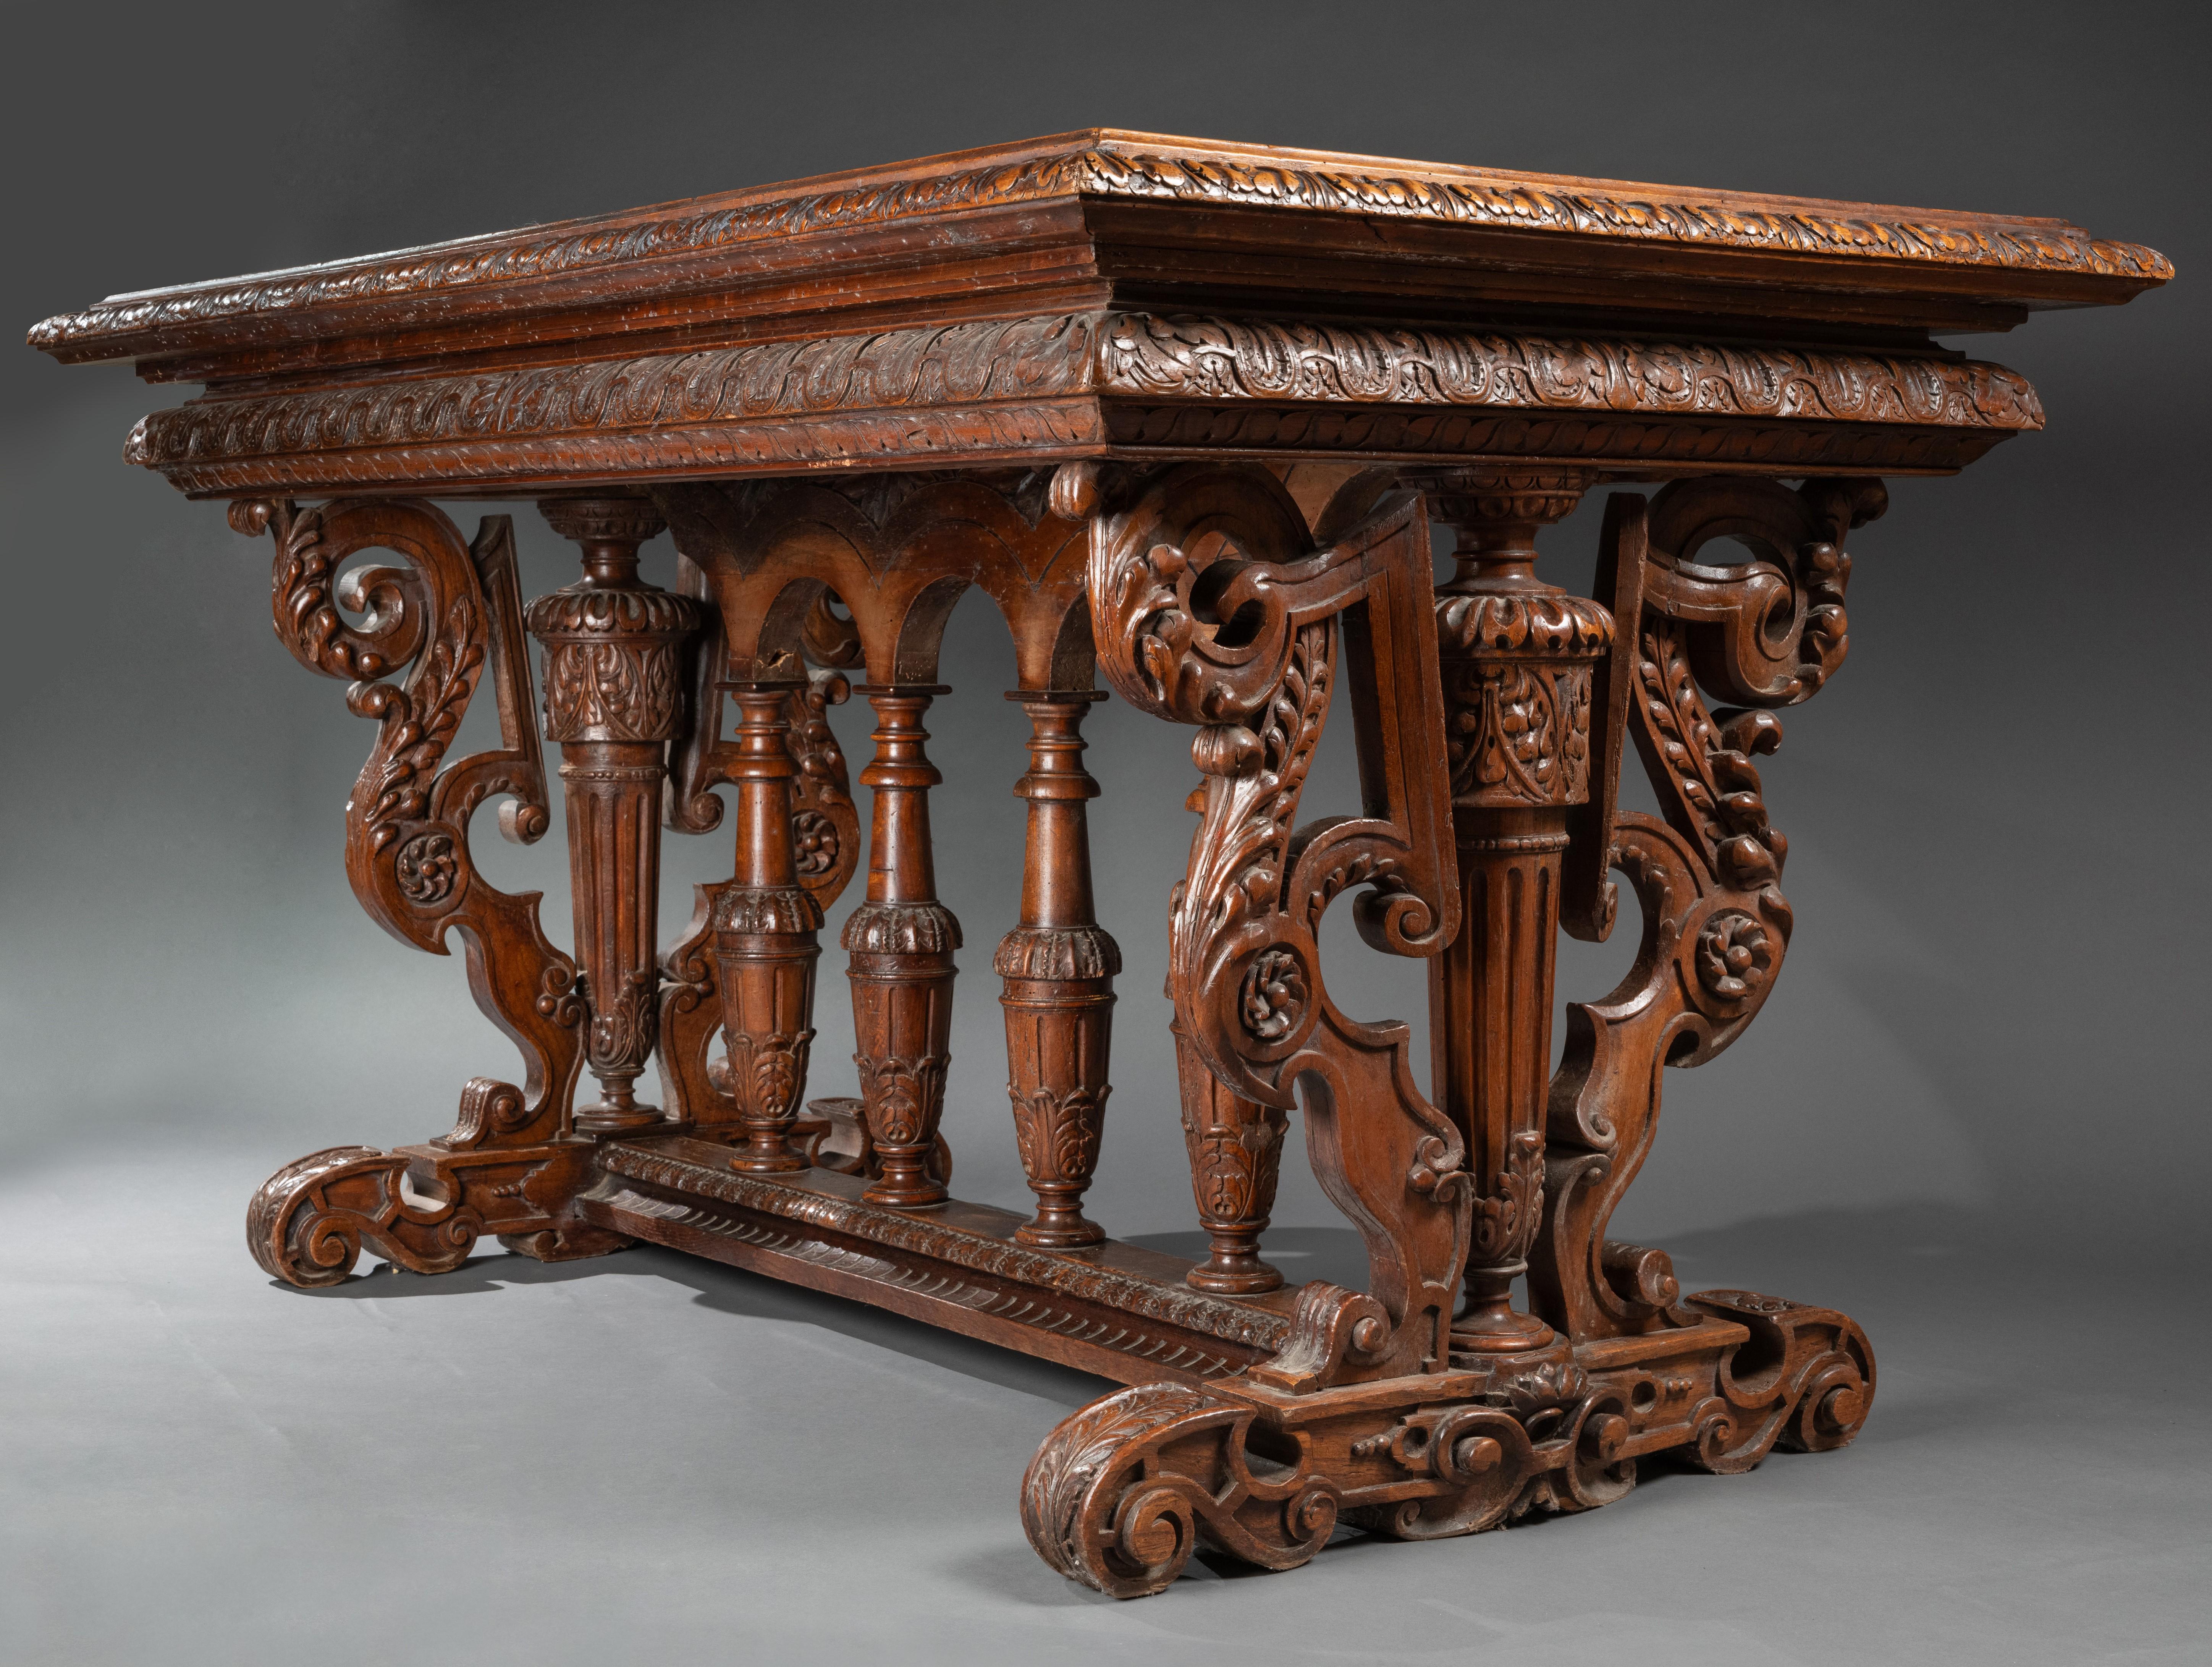 Walnut A late 16th century French Renaissance richly carved walnut center table For Sale